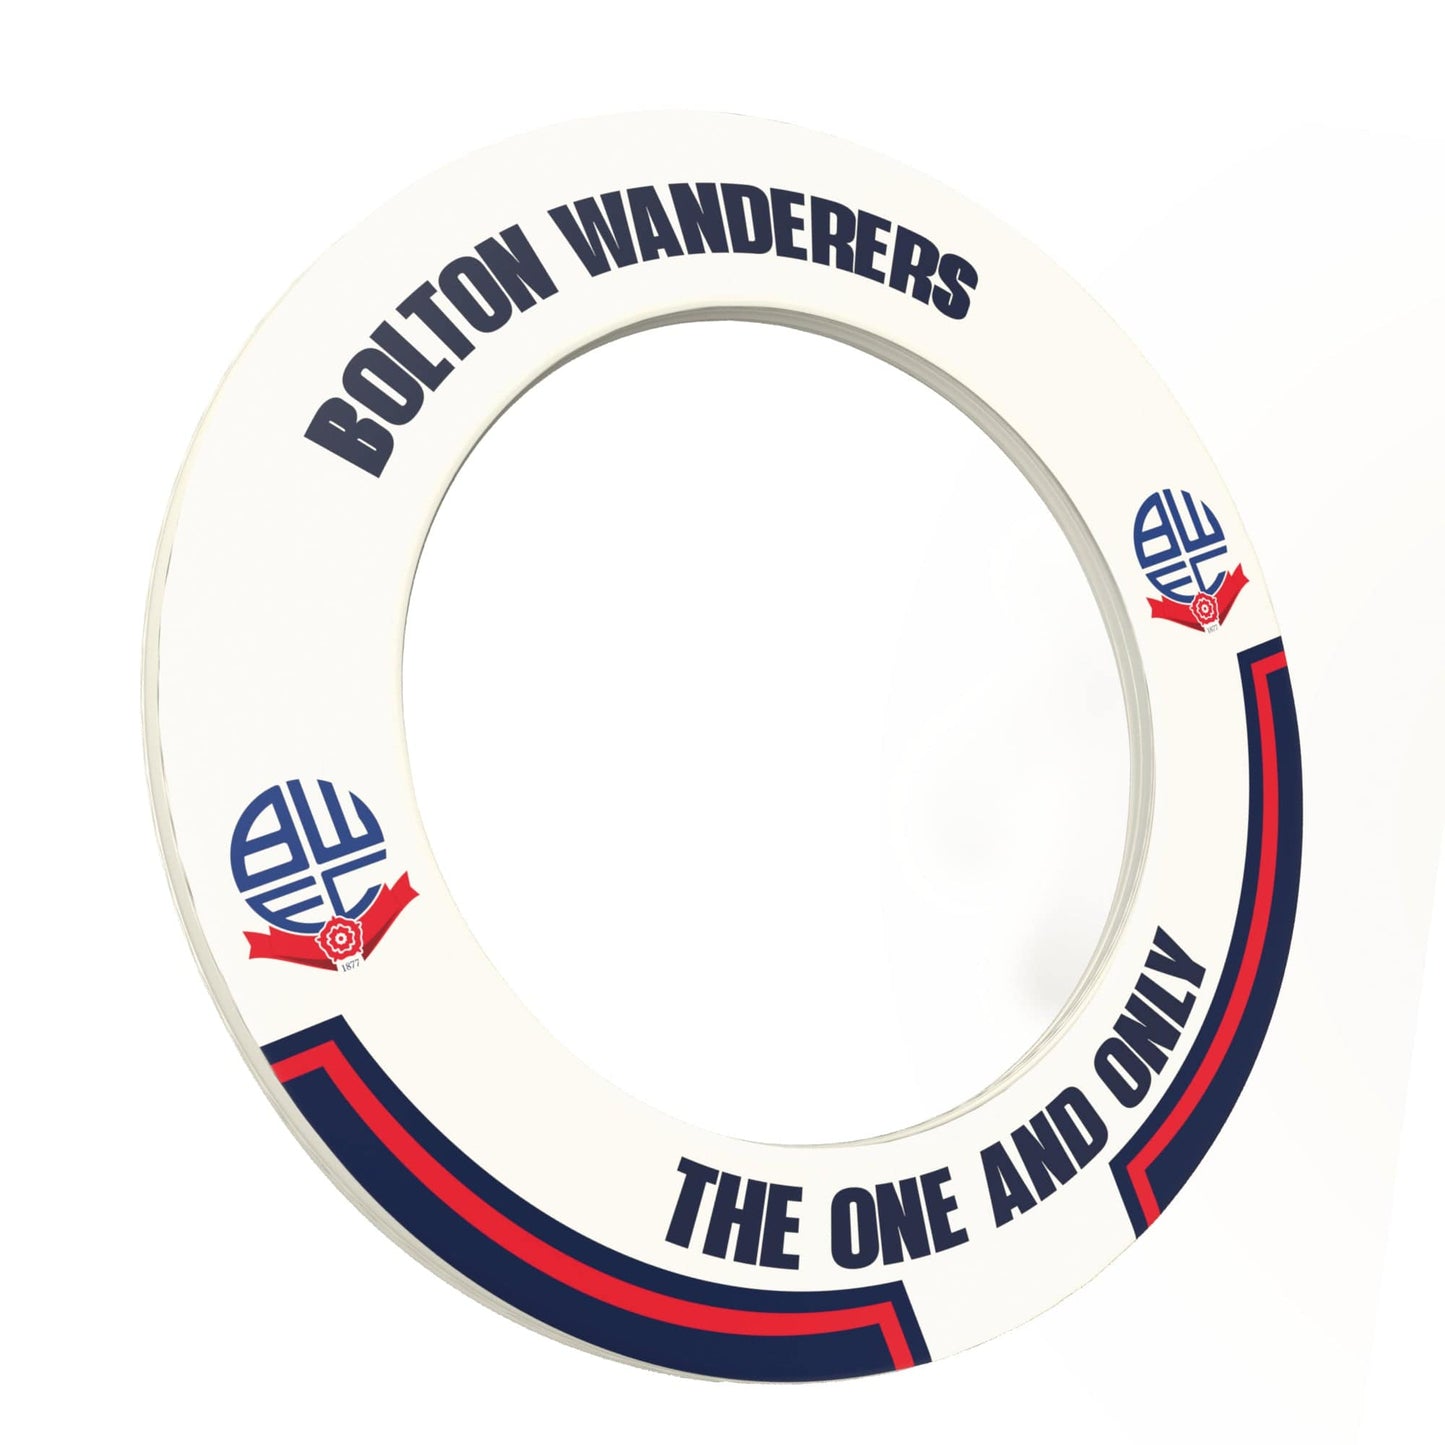 Bolton Wanderers Dartboard Surround - Official Licensed - BWFC - S1 - White - The One and Only